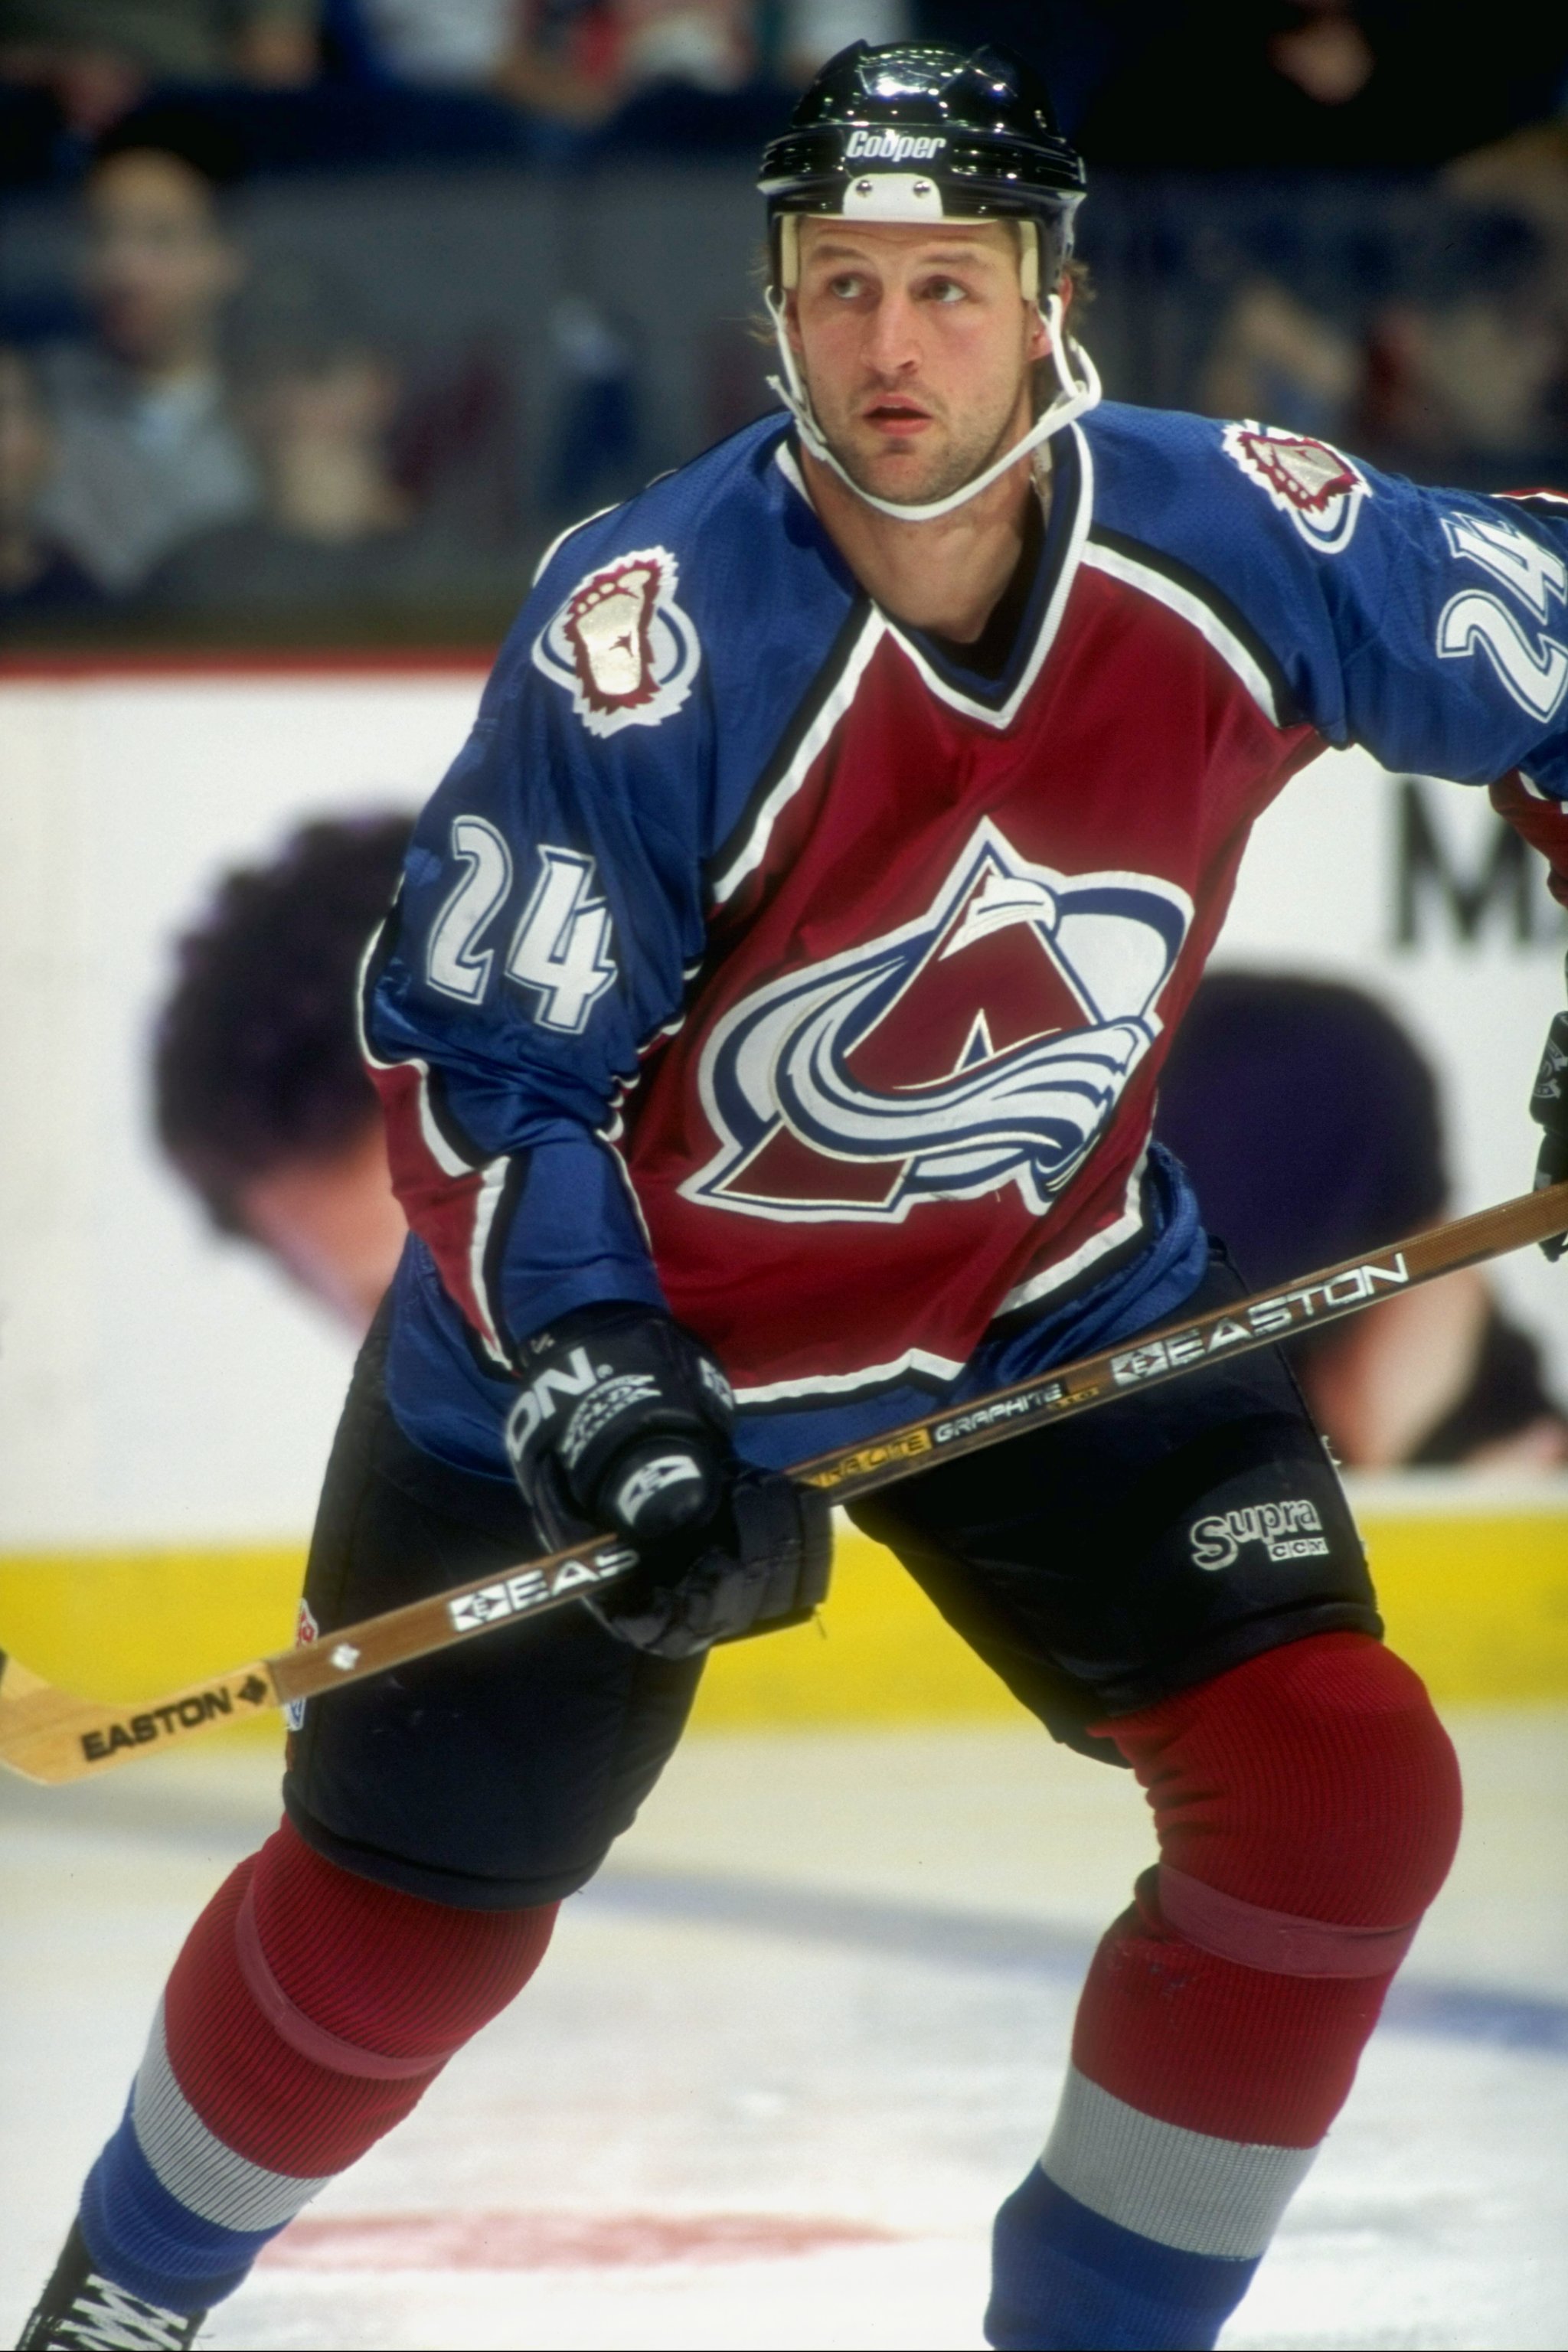 Peter Forsberg “overwhelmed” as Avalanche retire his jersey – The